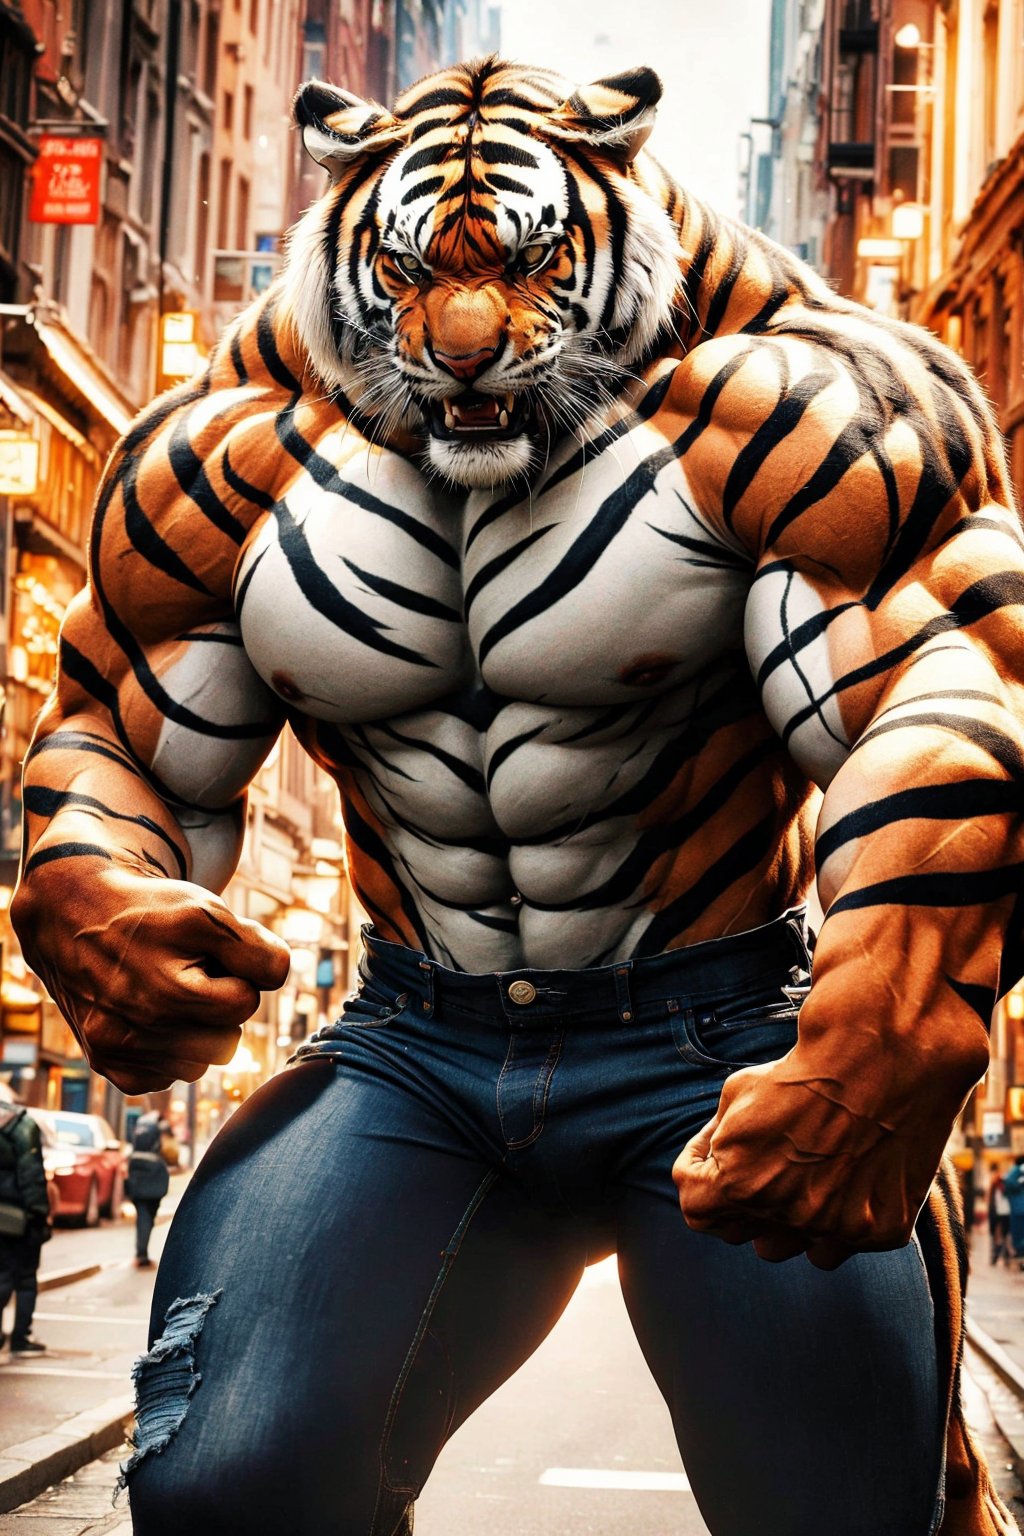 8k, masterpiece, ultra-realistic, best quality, high resolution, high definition, ,tiger boy, jeans, muscular, claws, city background